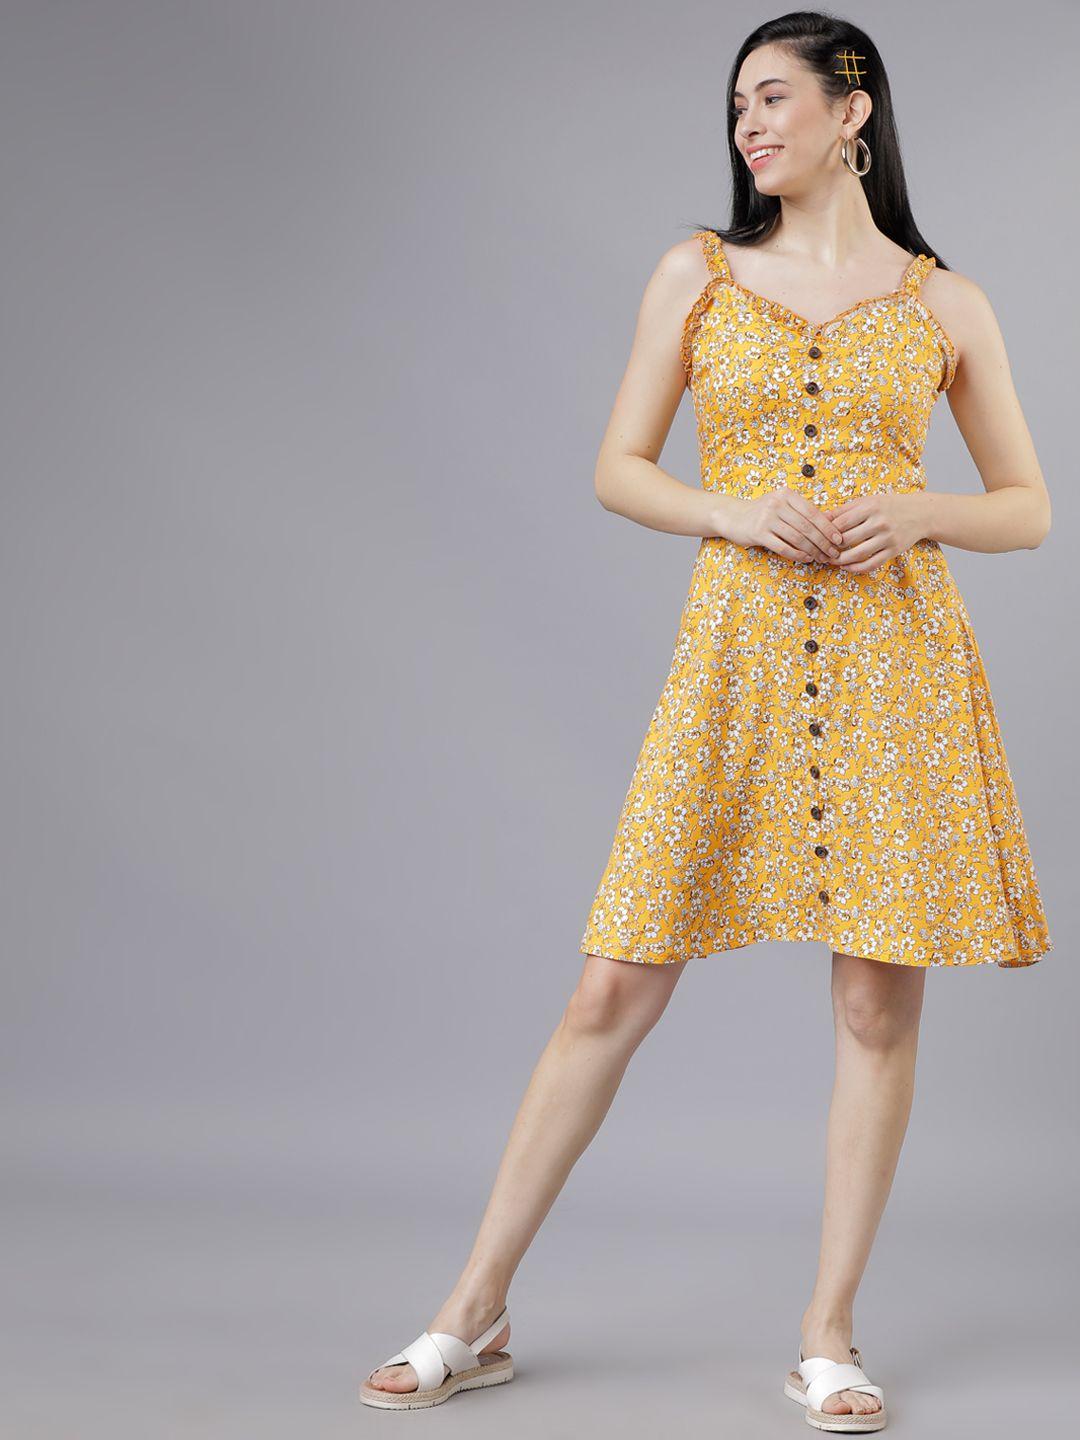 tokyo talkies women yellow & white fit and flare floral printed dress